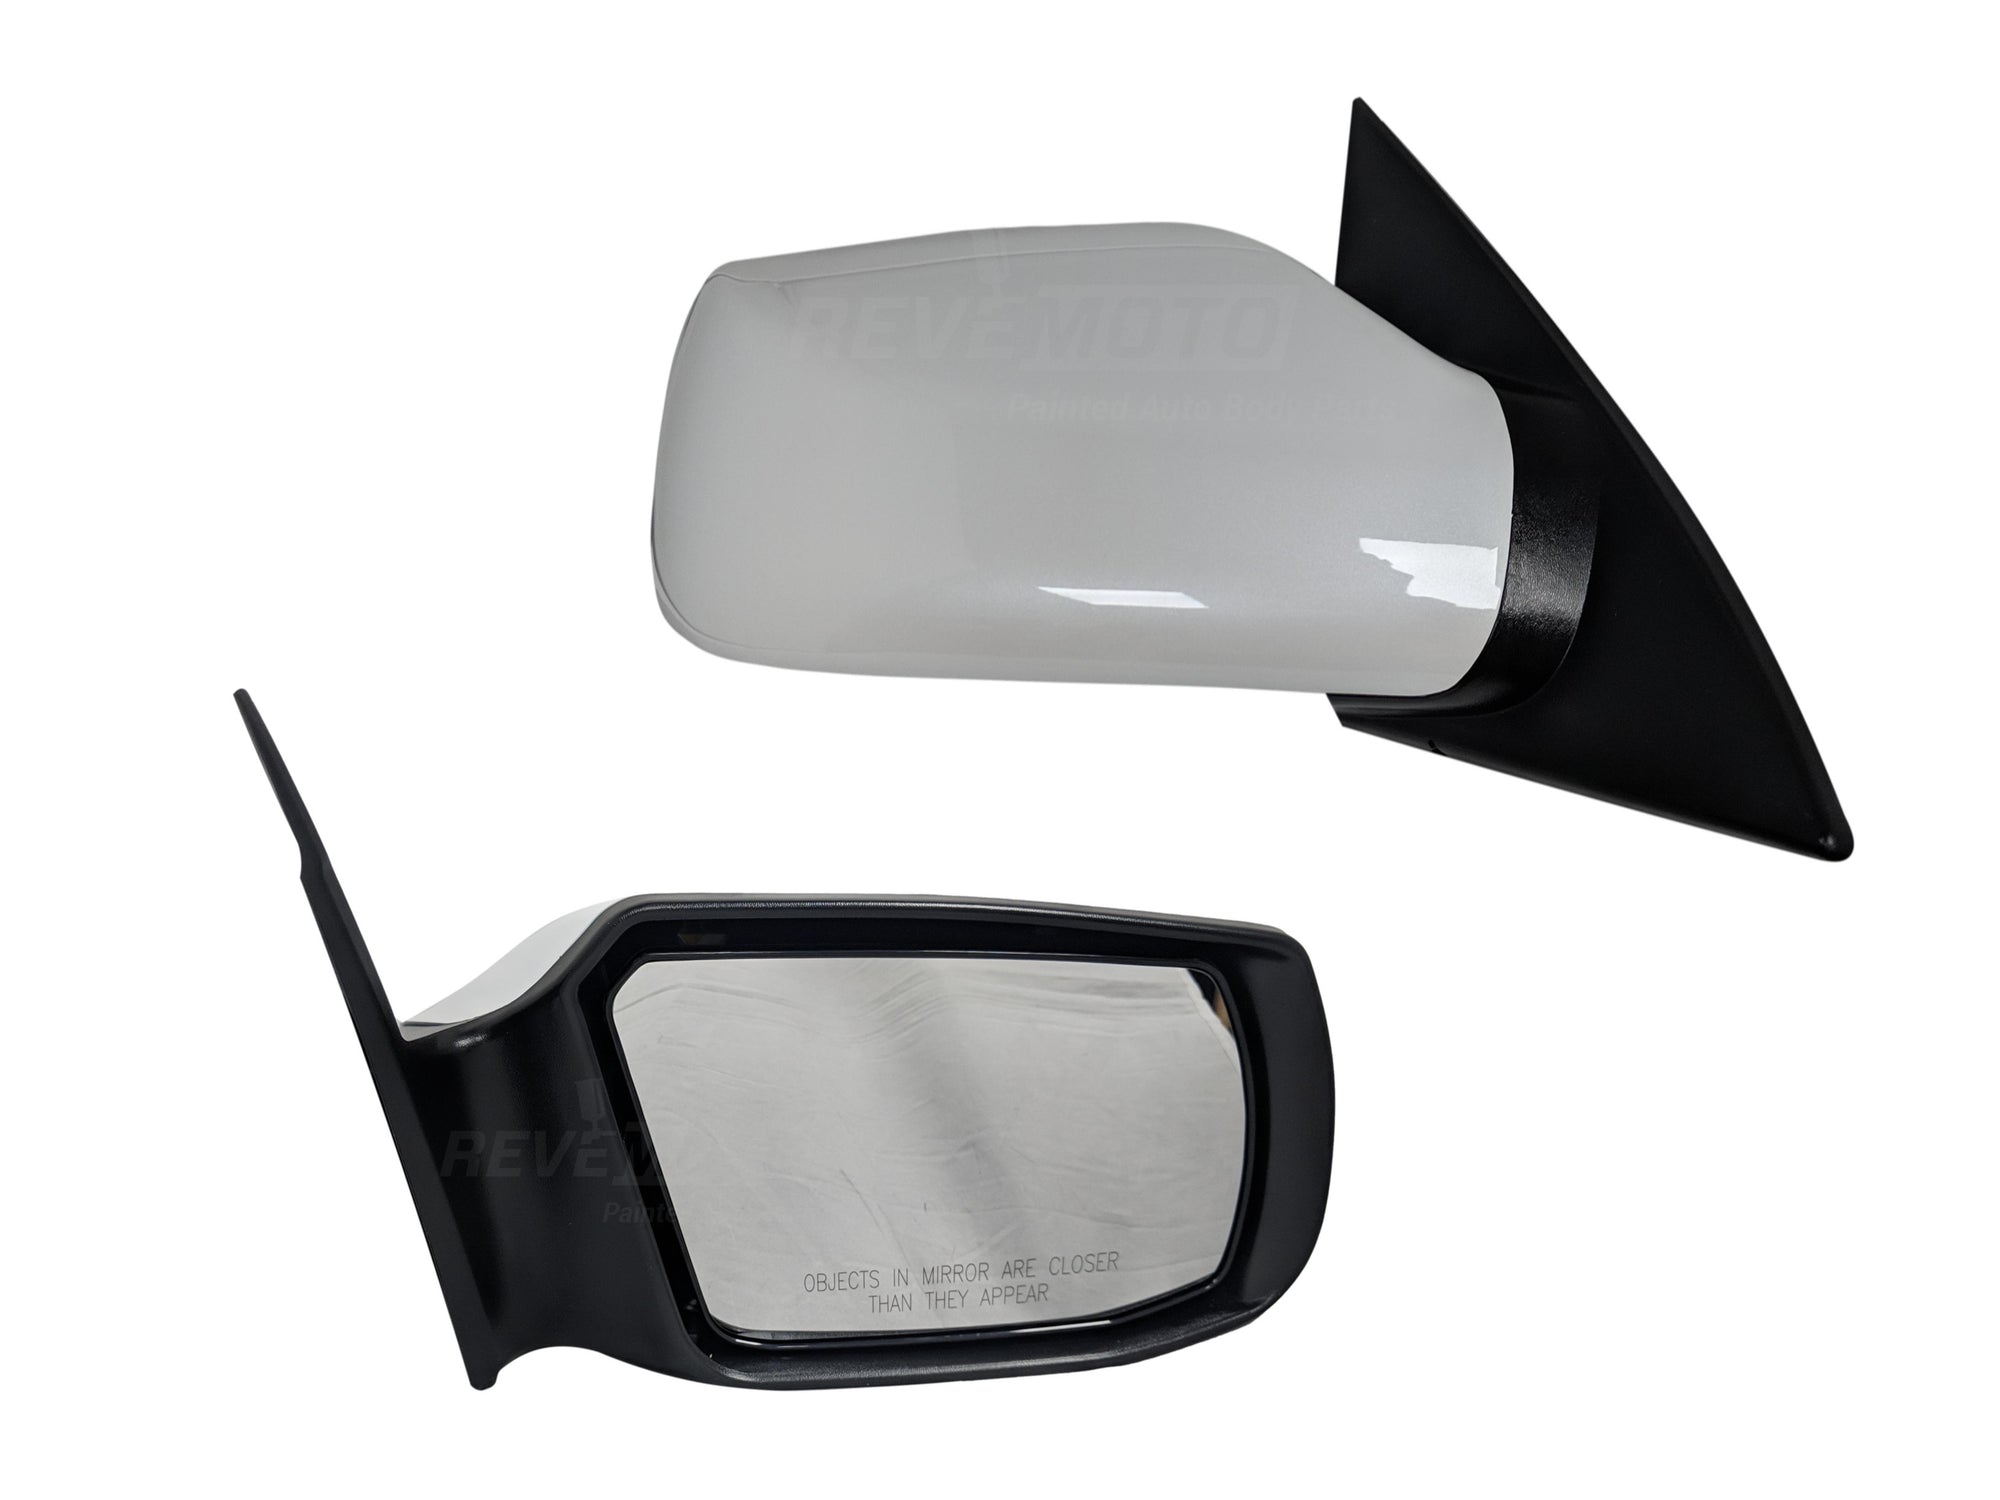 2007 Nissan Altima Passenger Side View Mirror, Without Heated Glass, Without Signal Lamp, 2.5 Liter, Sedan, 4 Door, PaintedSatin White Pearl (QX3) 96301JA04A NI1321163